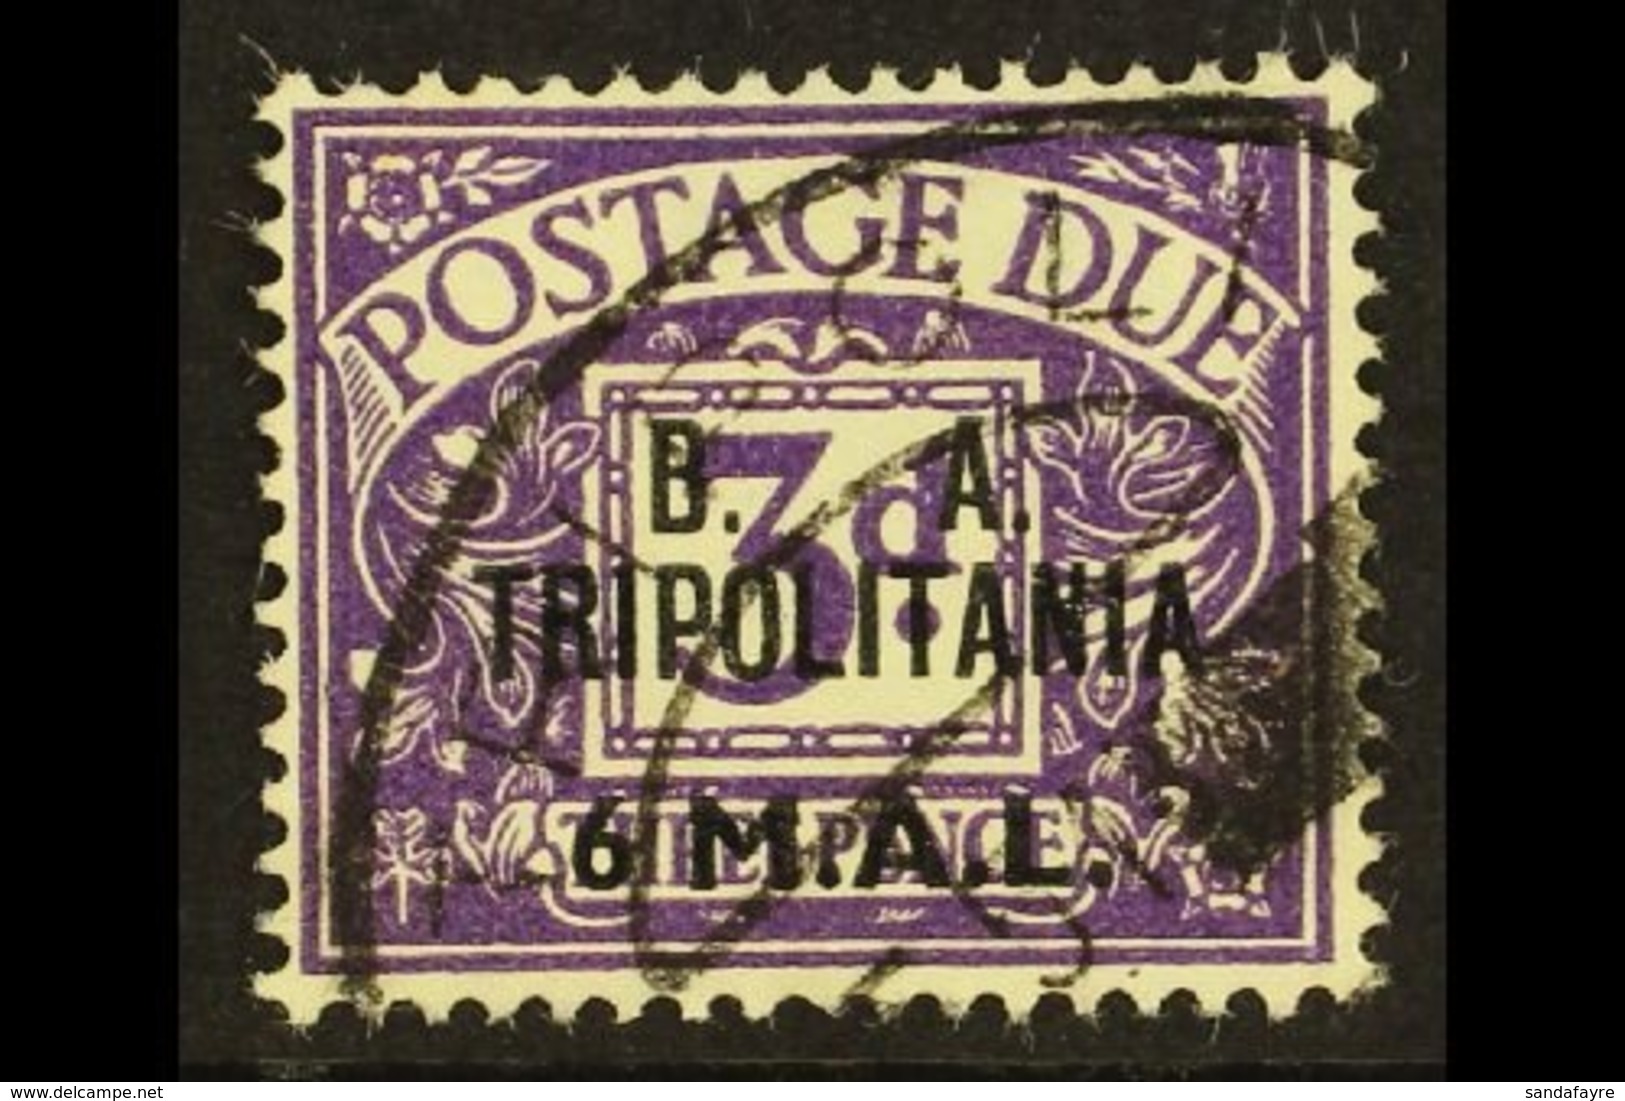 TRIPOLITANIA  POSTAGE DUE 1950 6l On 3d Violet, "B. A. TRIPOLITANIA" Ovpt, SG TD9, Good To Fine Used. For More Images, P - Italian Eastern Africa